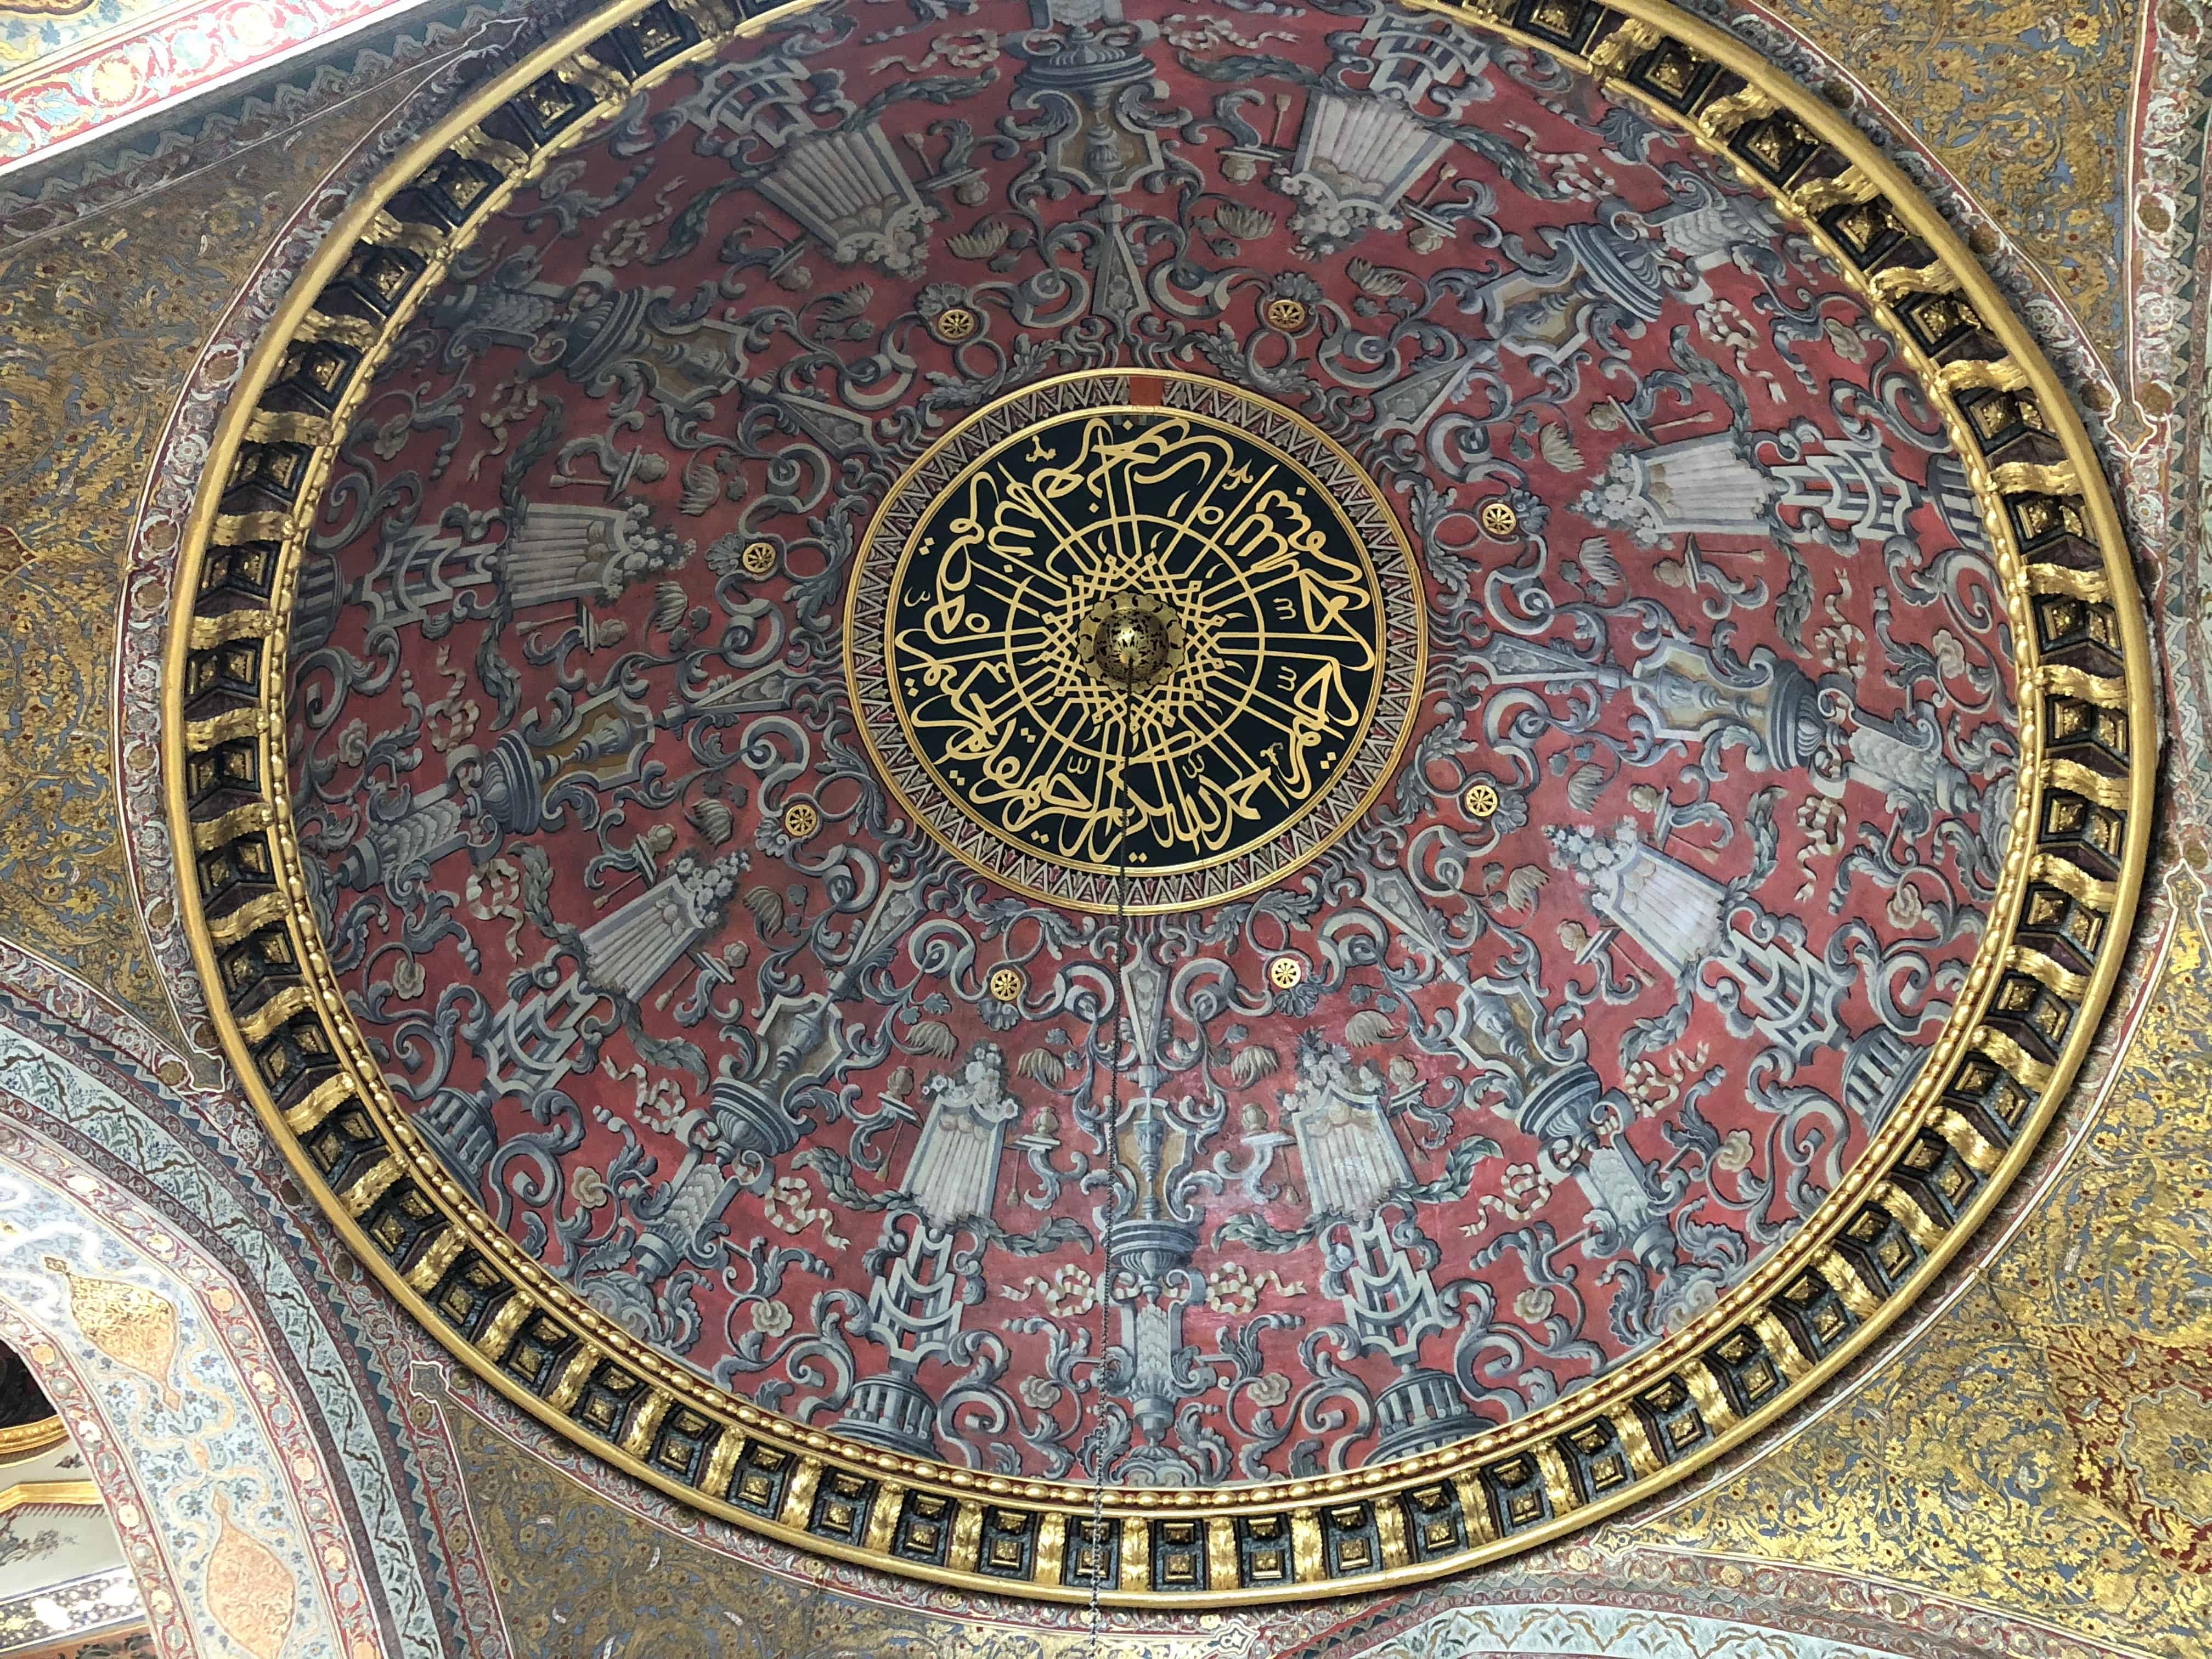 Dome after restoration in the Imperial Hall in the Imperial Harem at Topkapi Palace in Istanbul, Turkey